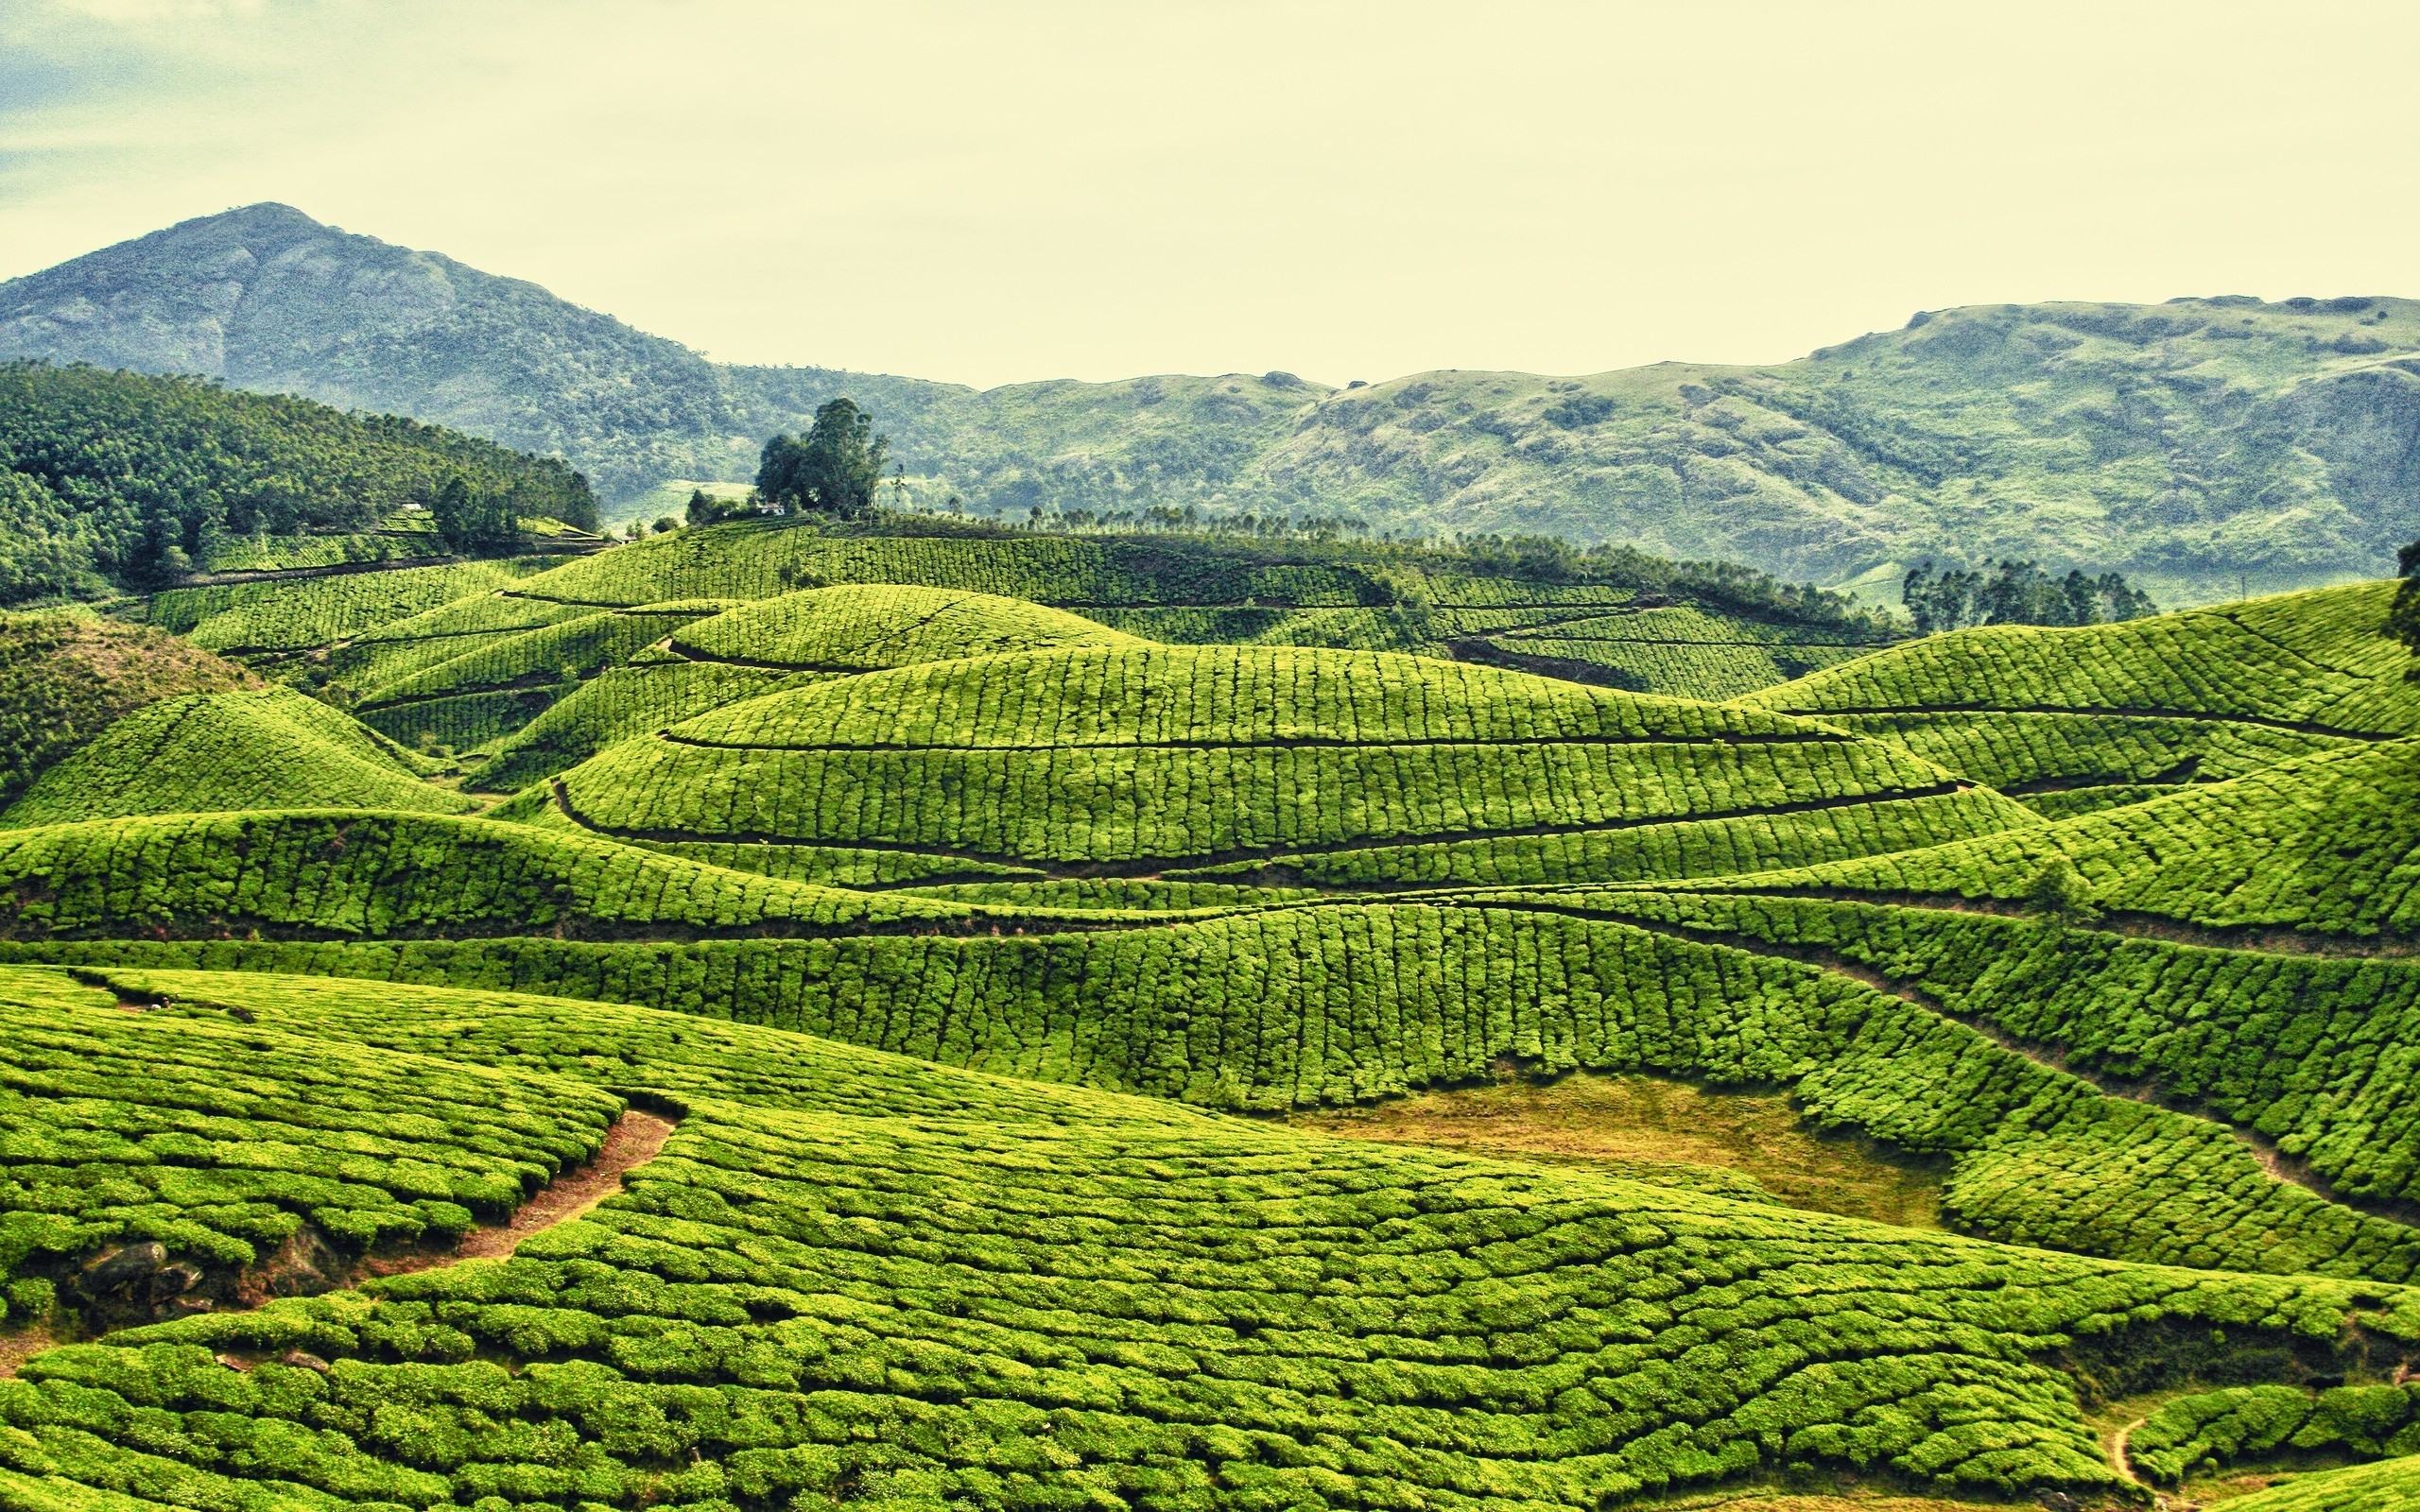 2560x1600 Daily Wallpaper: Tea Plantation in Kerala, India | I Like To Waste My Time